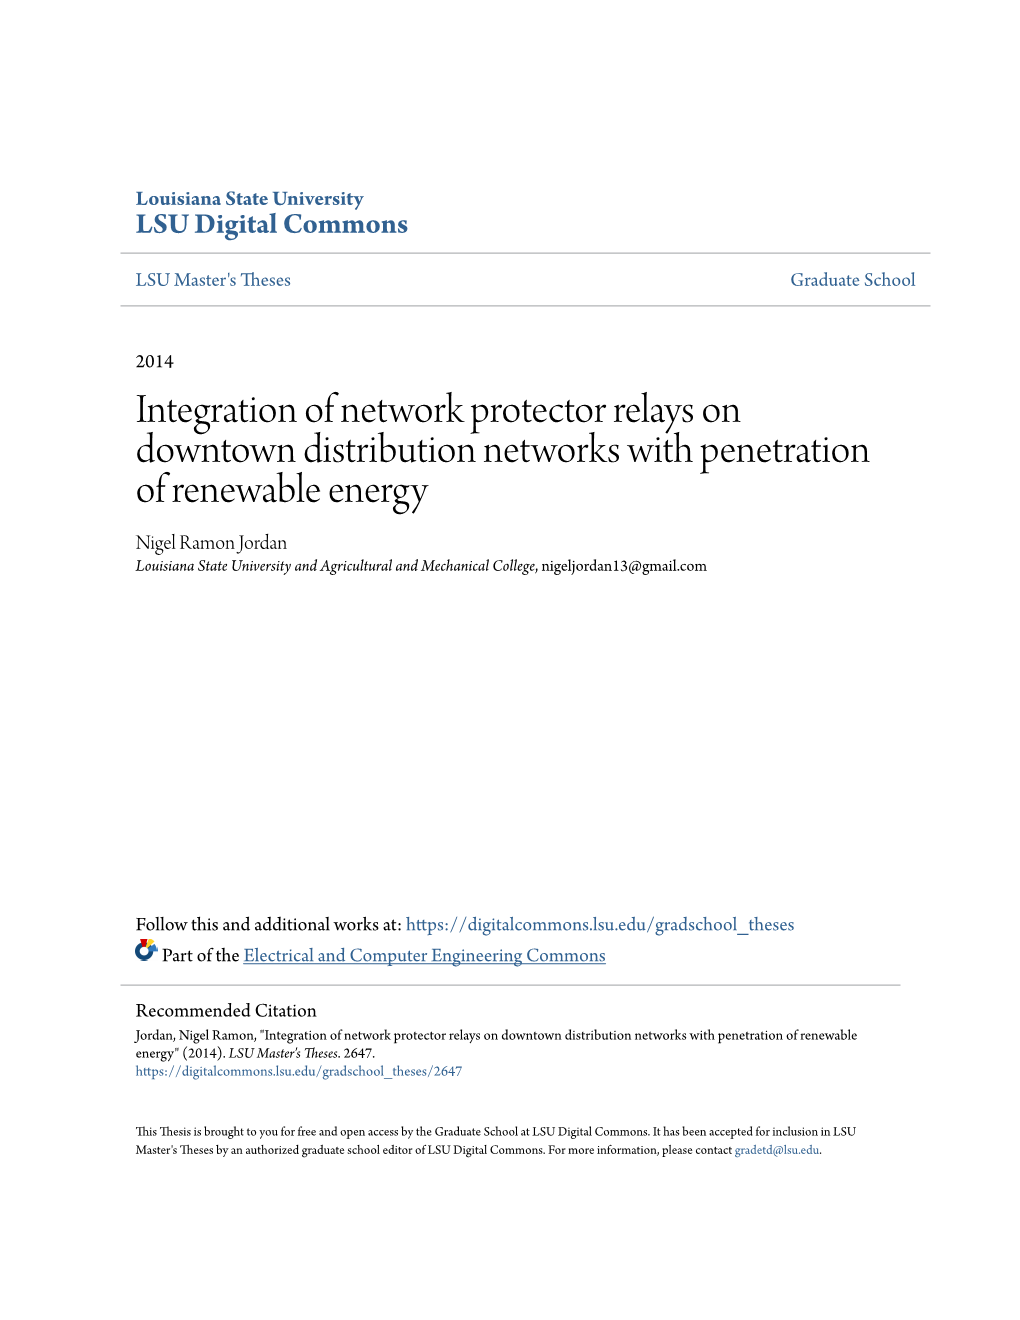 Integration of Network Protector Relays on Downtown Distribution Networks